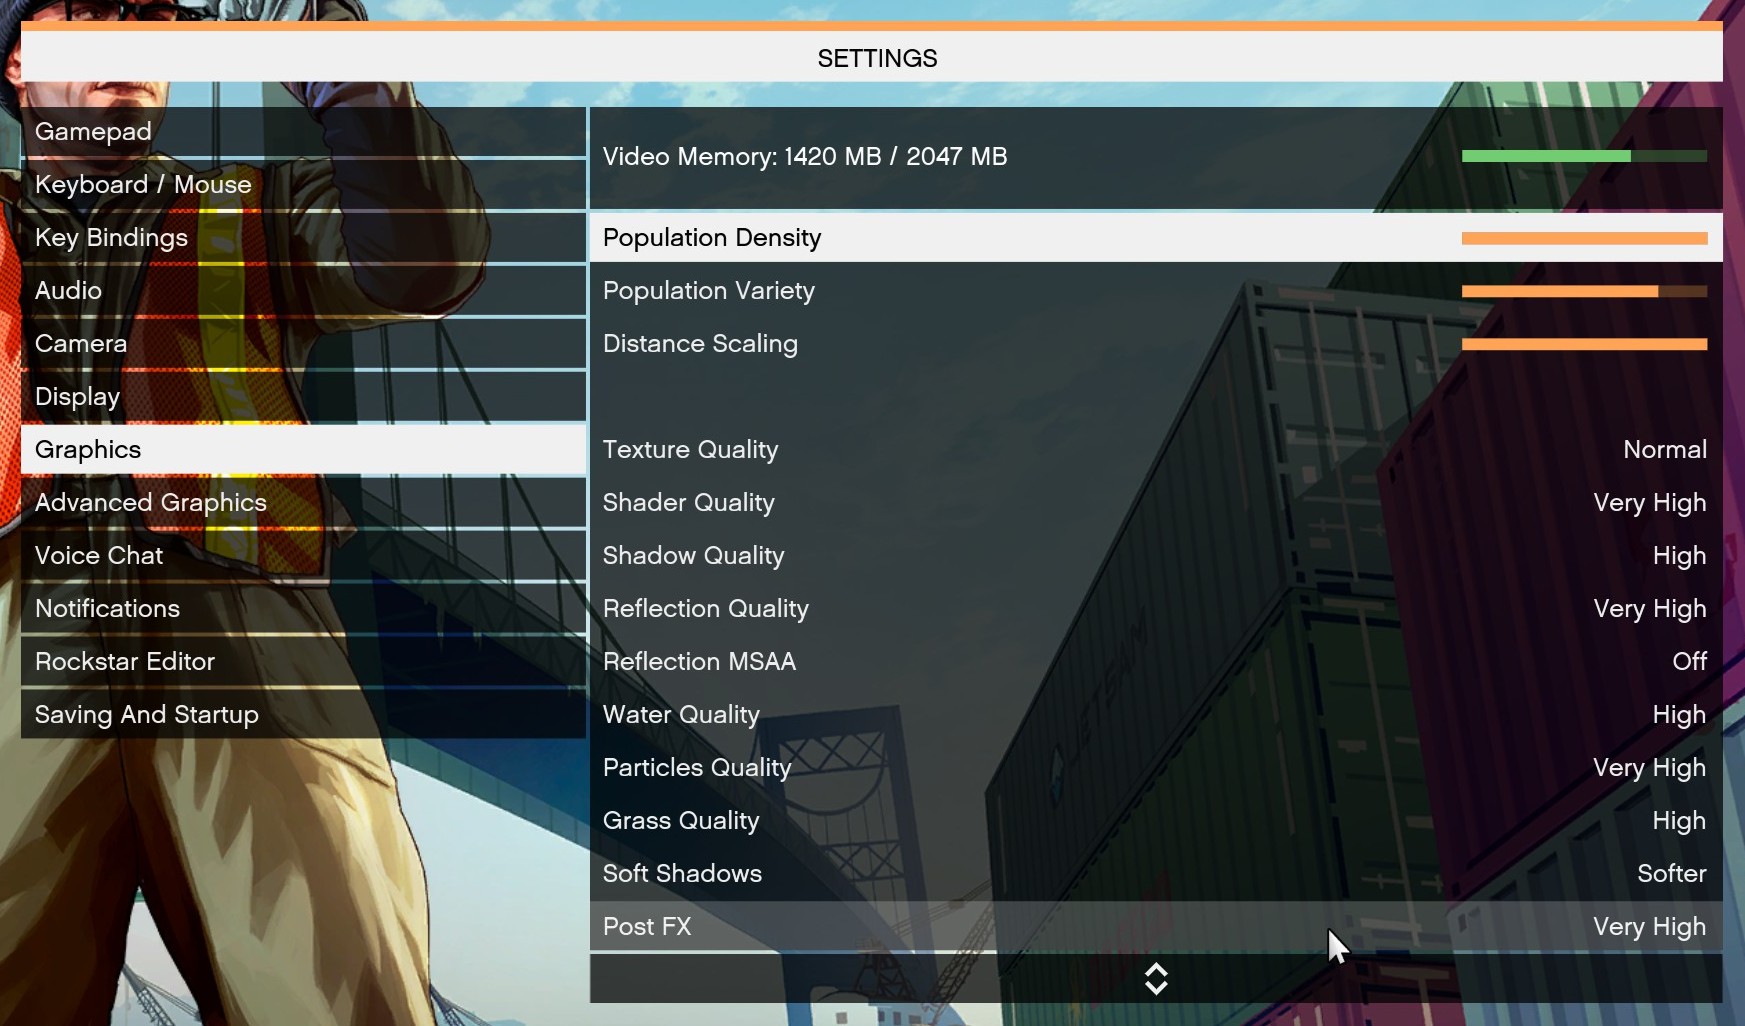 Gaming Performance Grand Theft Auto V The Amd 2nd Gen Ryzen Deep Dive The 2700x 2700 2600x And 2600 Tested